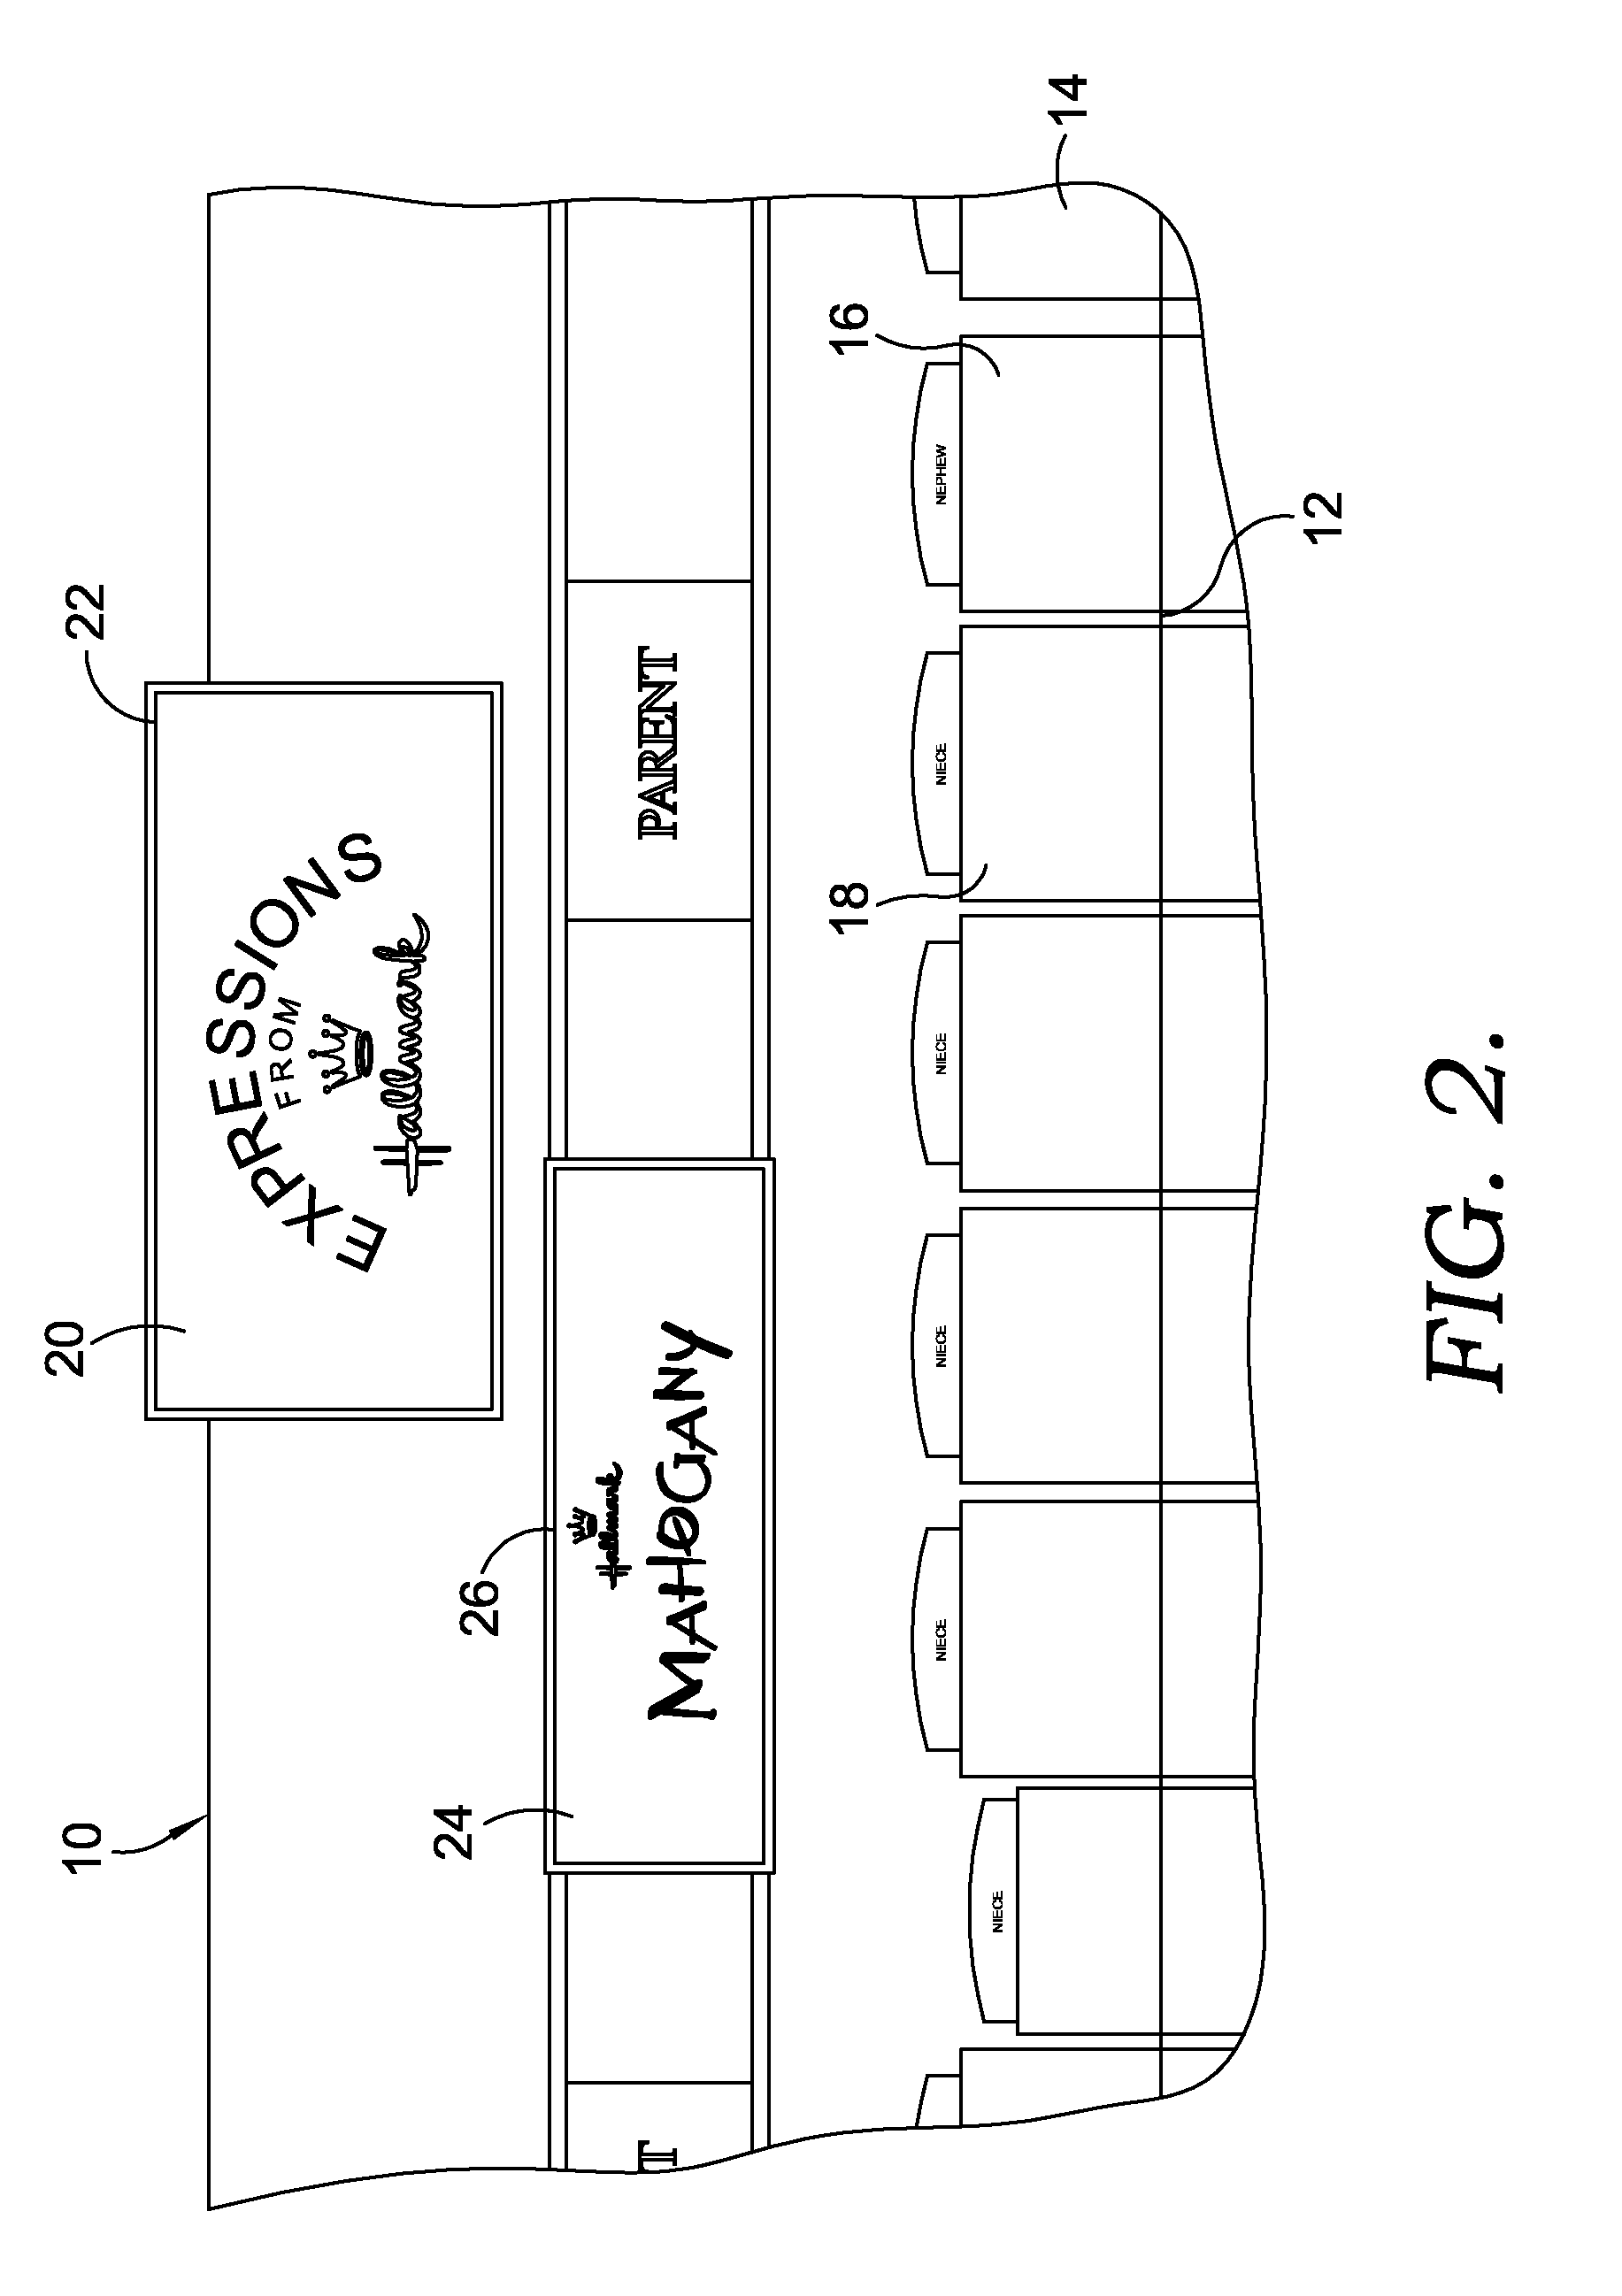 Method of and apparatus for displaying merchandise